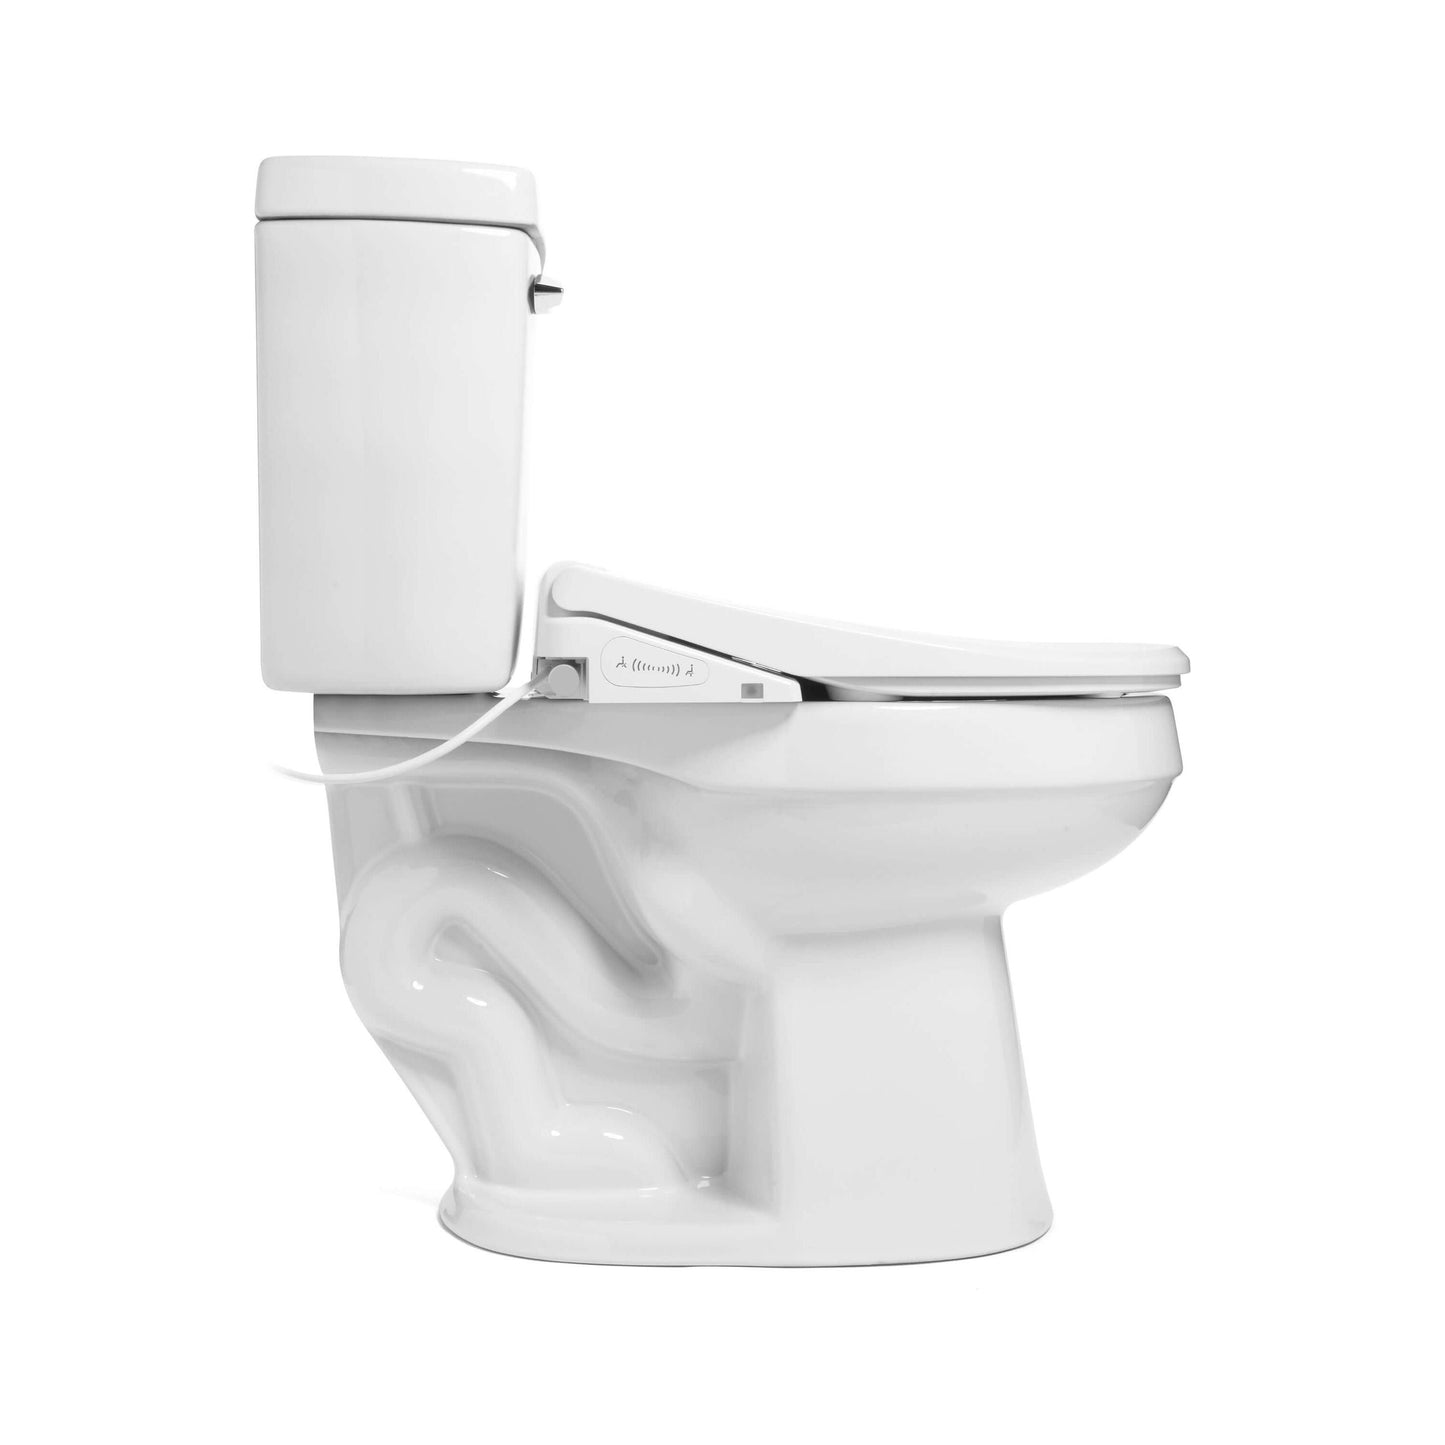 Swash Thinline T44 Bidet Seat - side view attached to a toilet